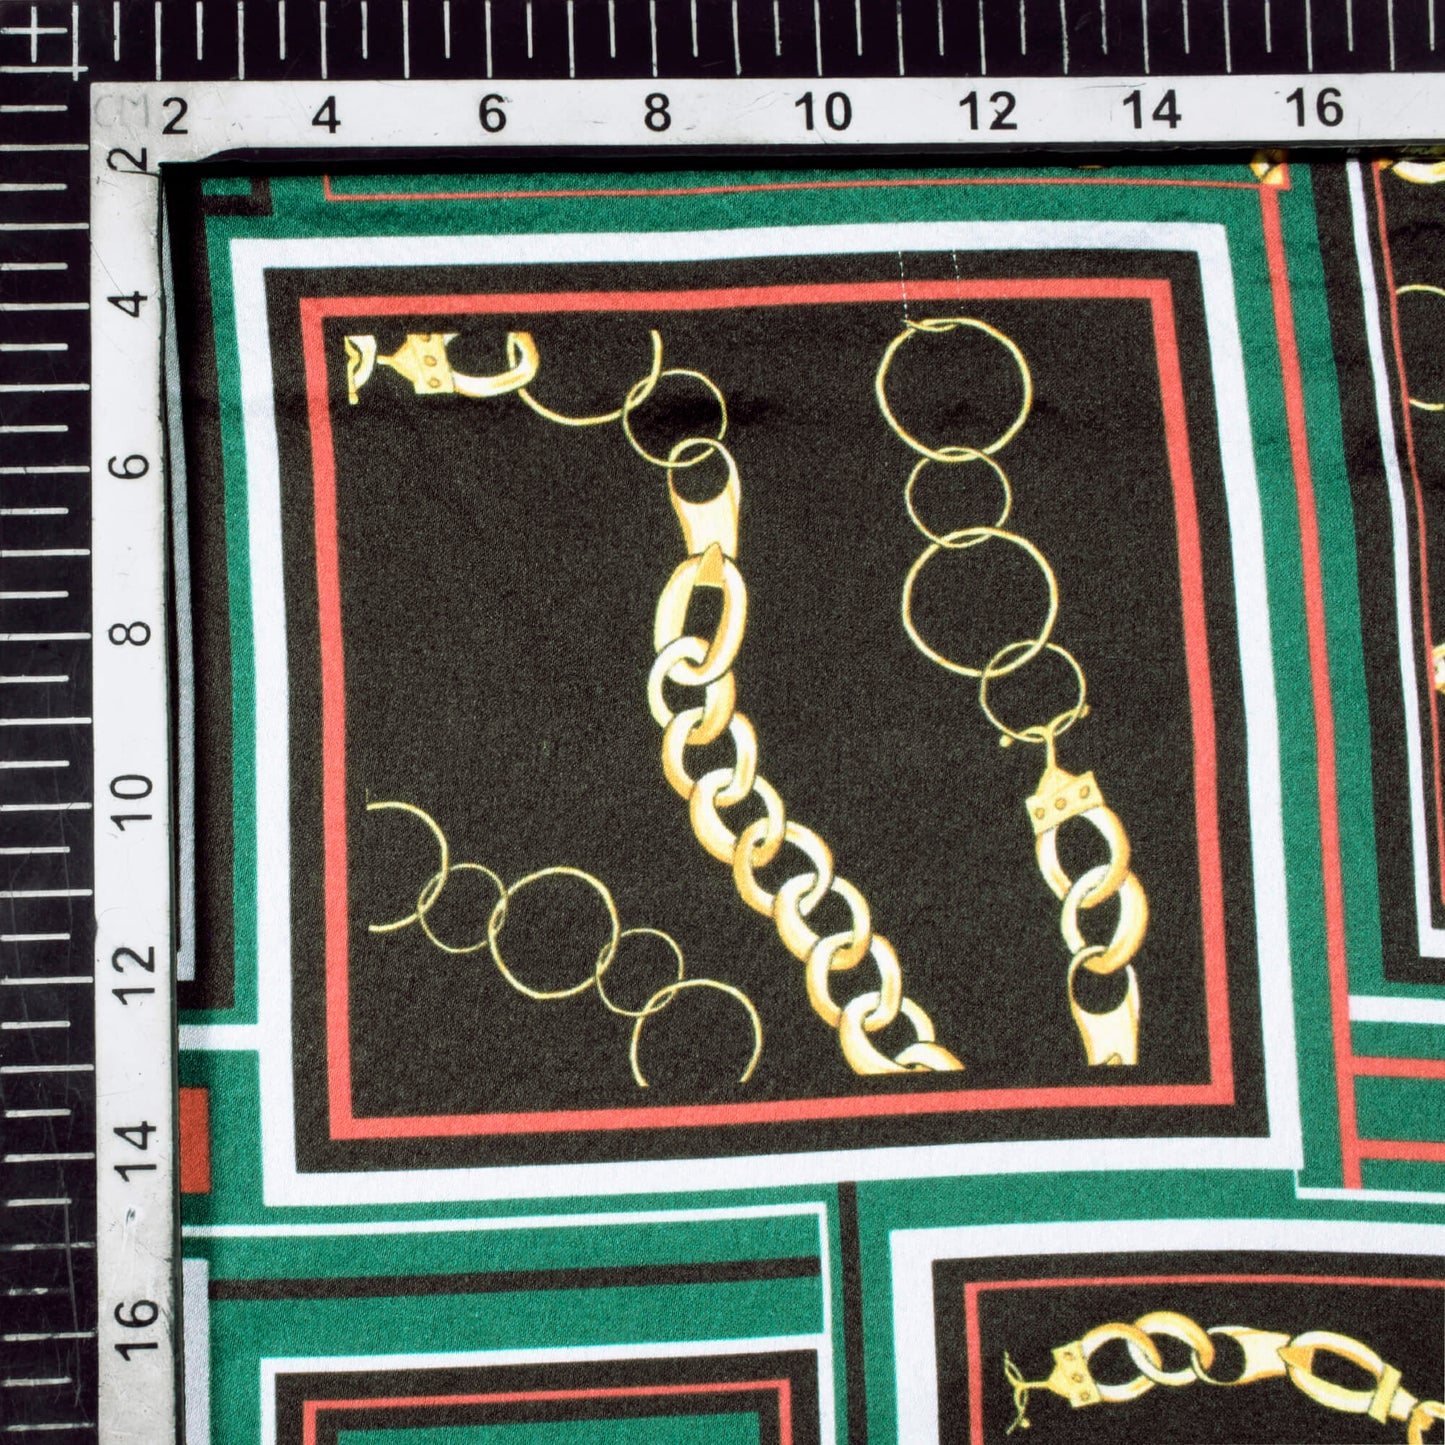 Black And Green Chain Pattern Digital Print Japan Satin Fabric - Fabcurate